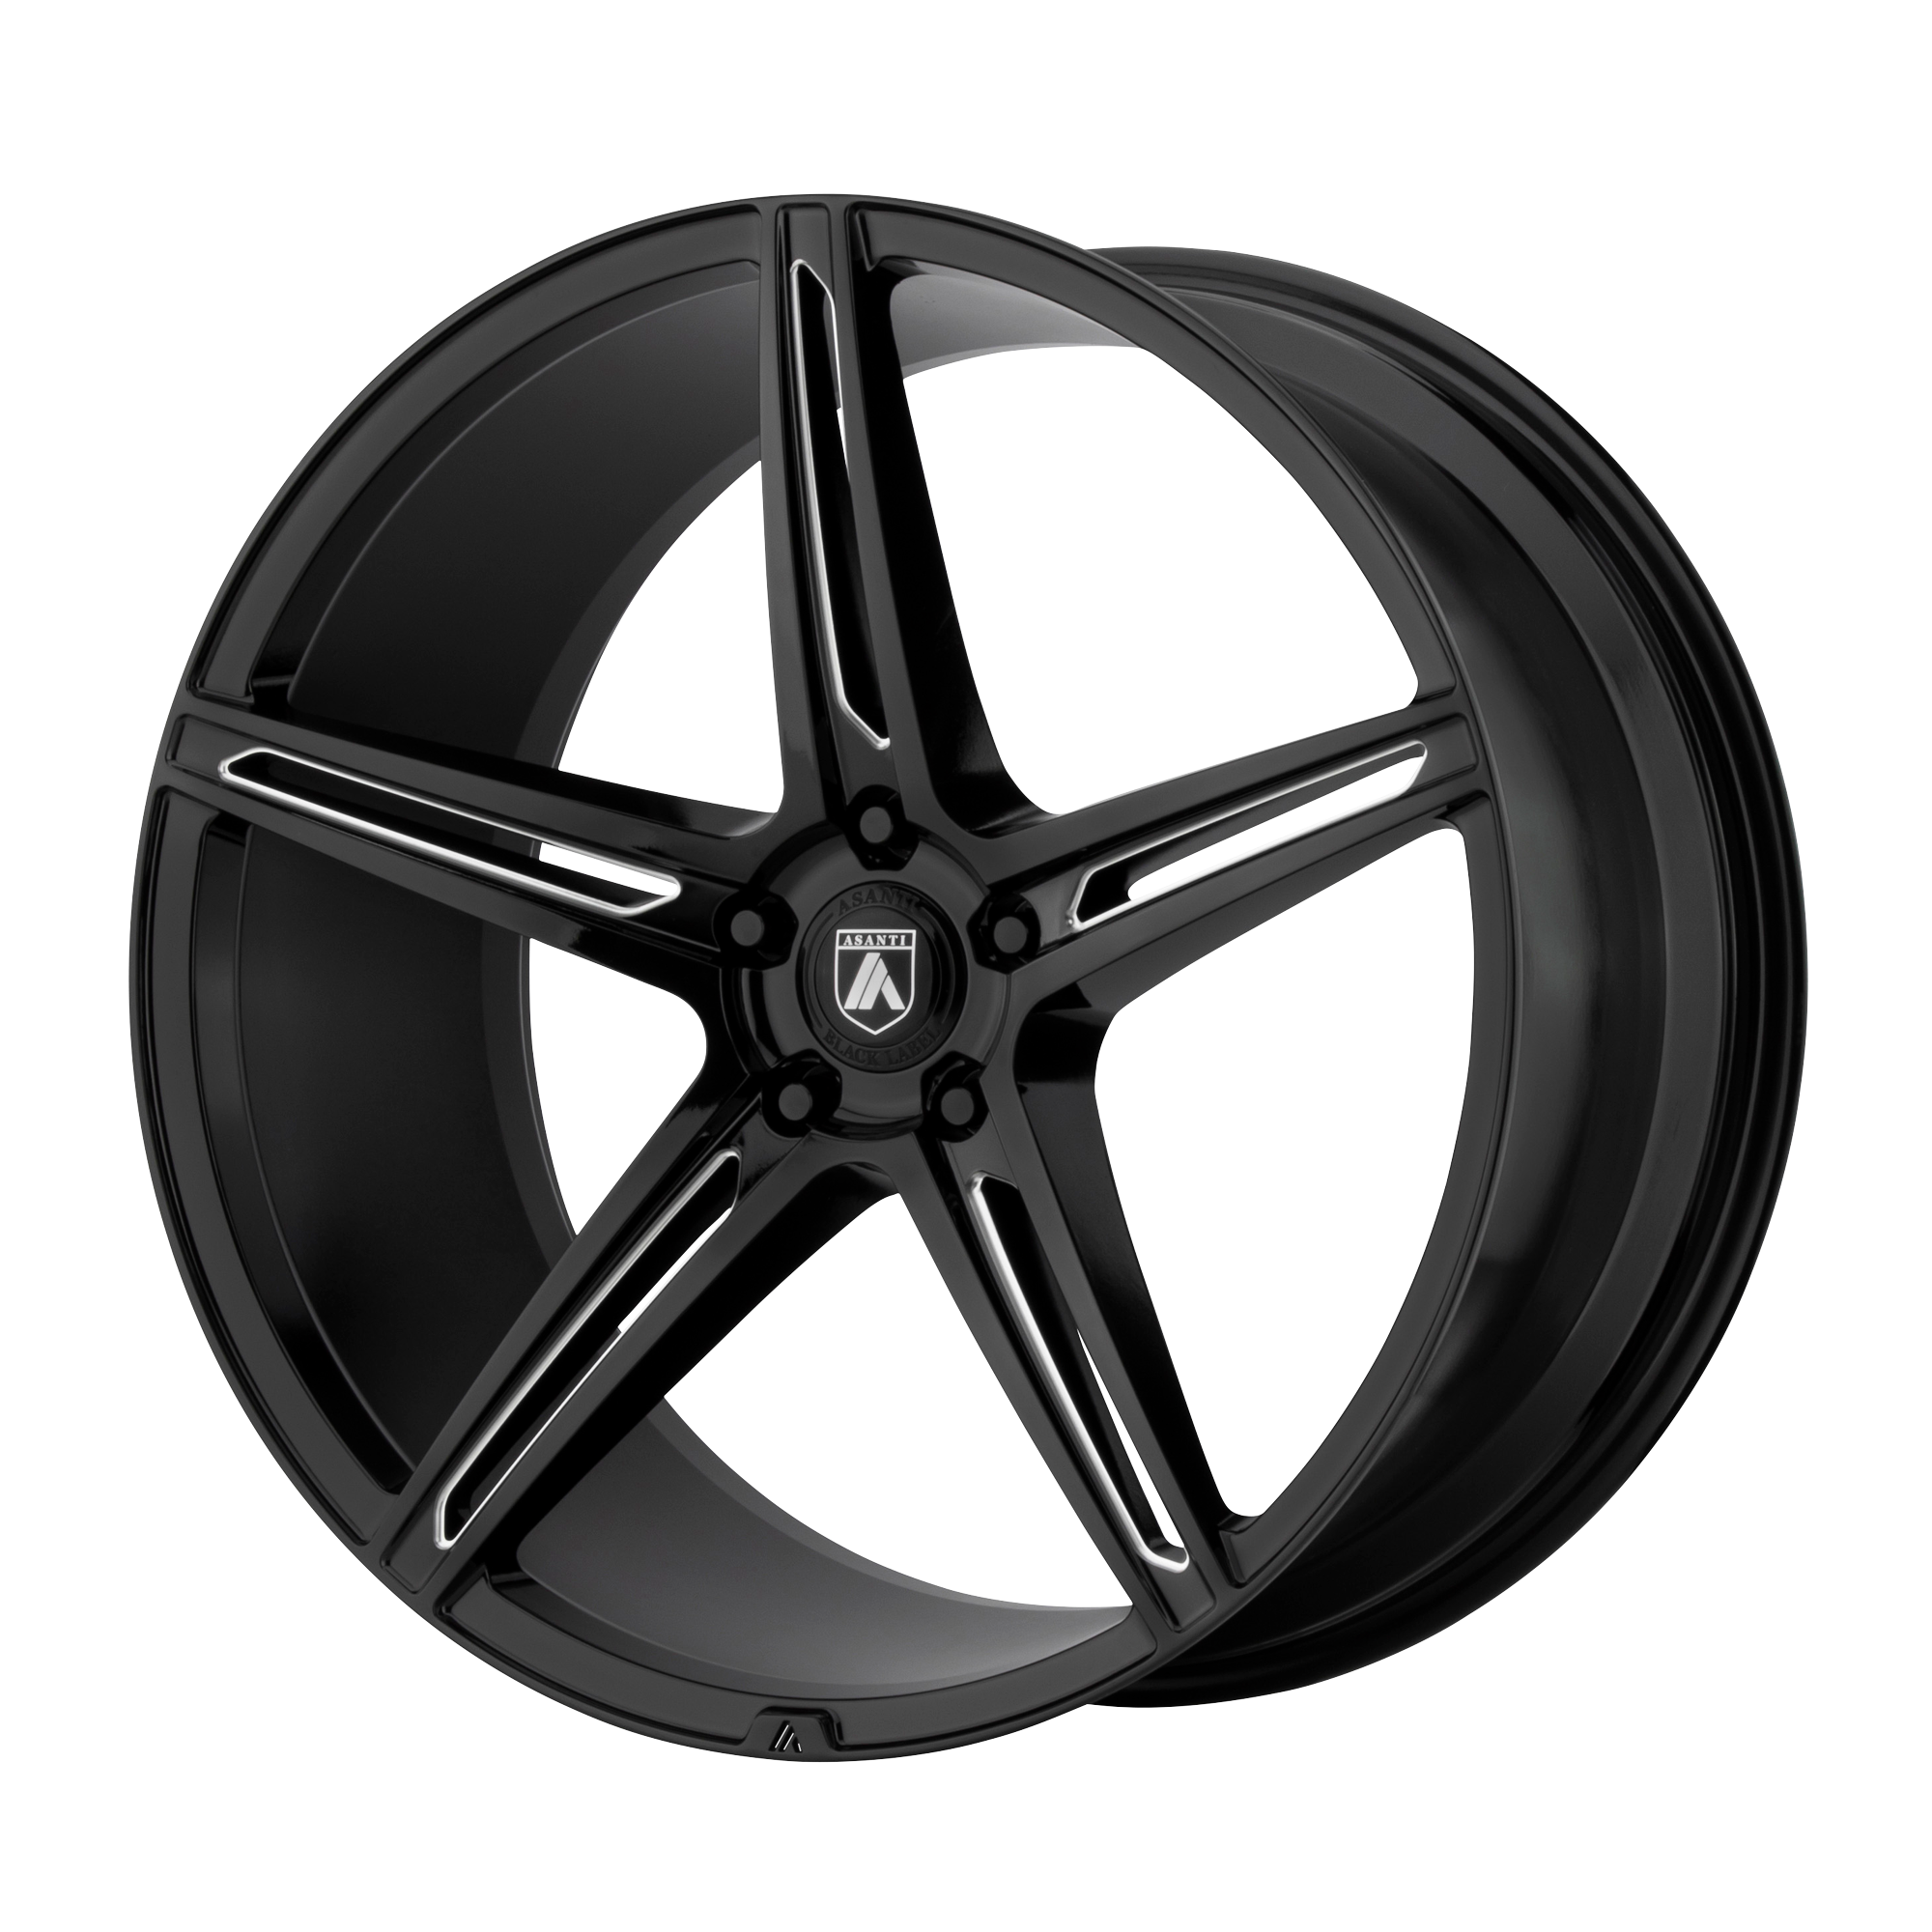 ALPHA 5 20x10.5 5x115.00 GLOSS BLACK MILLED (20 mm) - Tires and Engine Performance